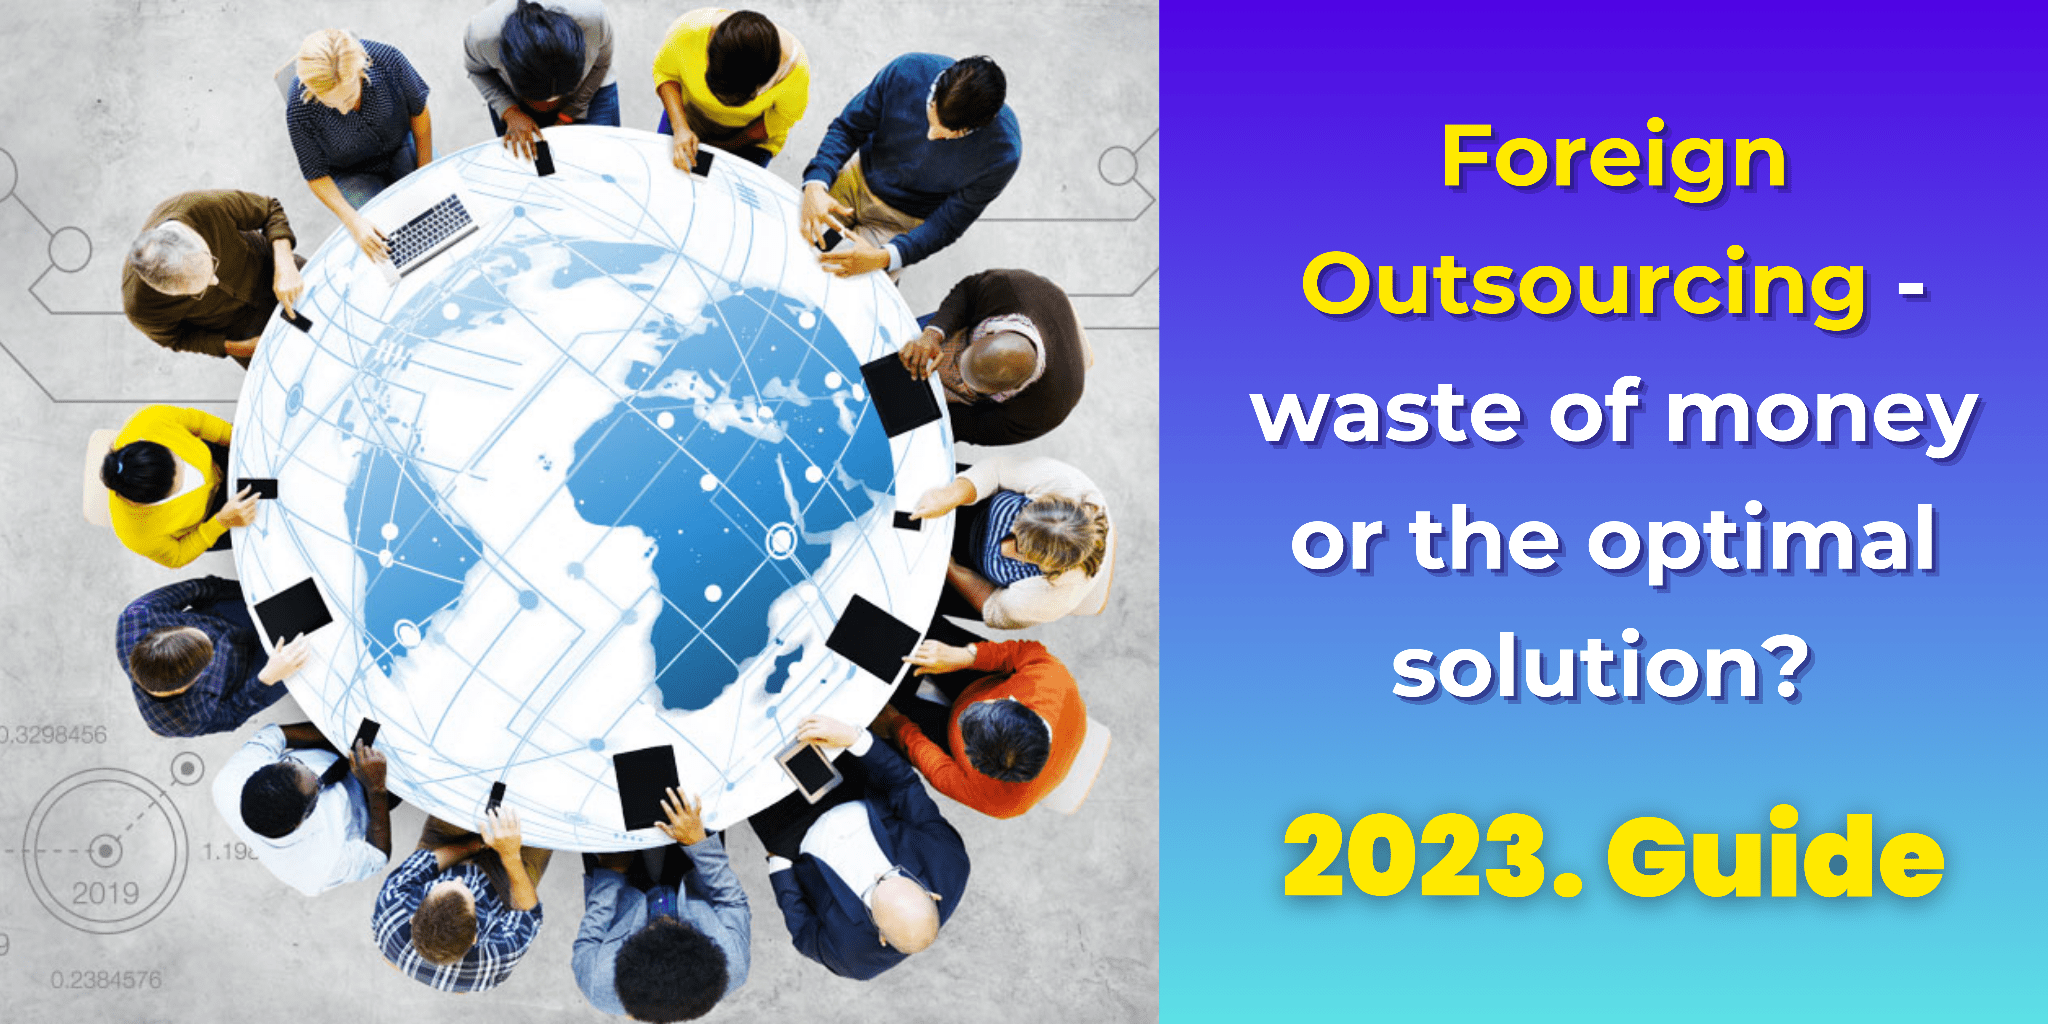 Foreign Outsourcing - Complete 2023. Guide